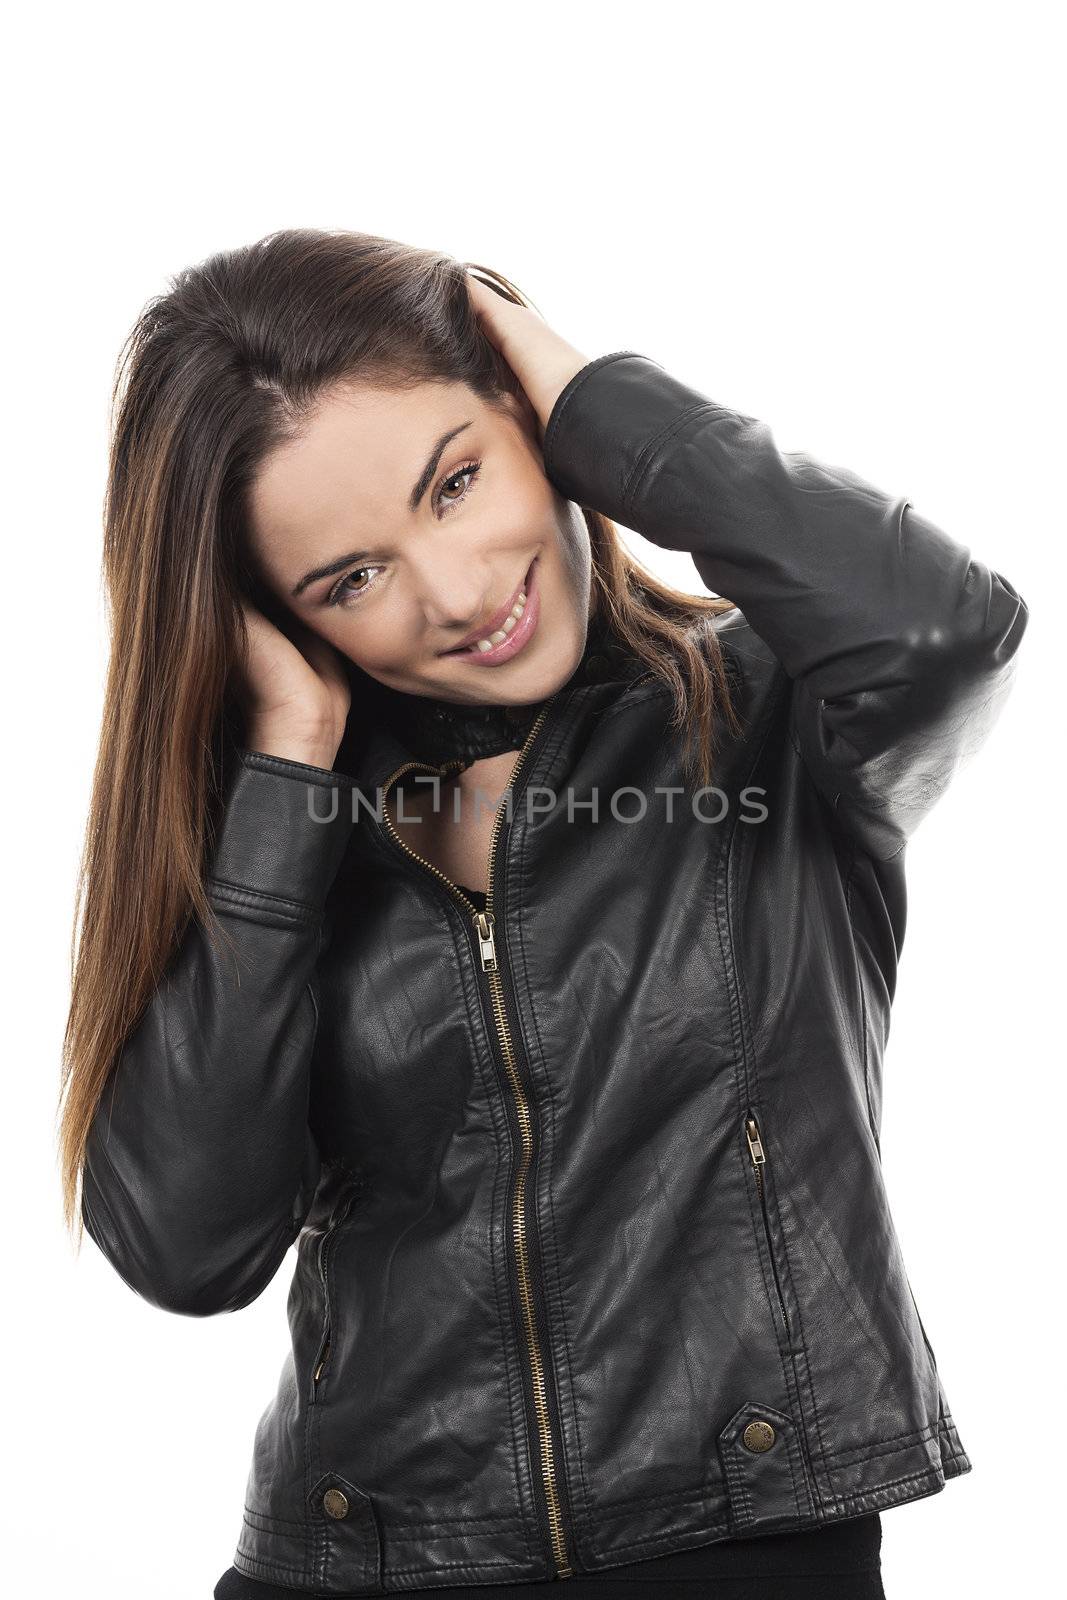 brown hair woman with hand in hair by vwalakte